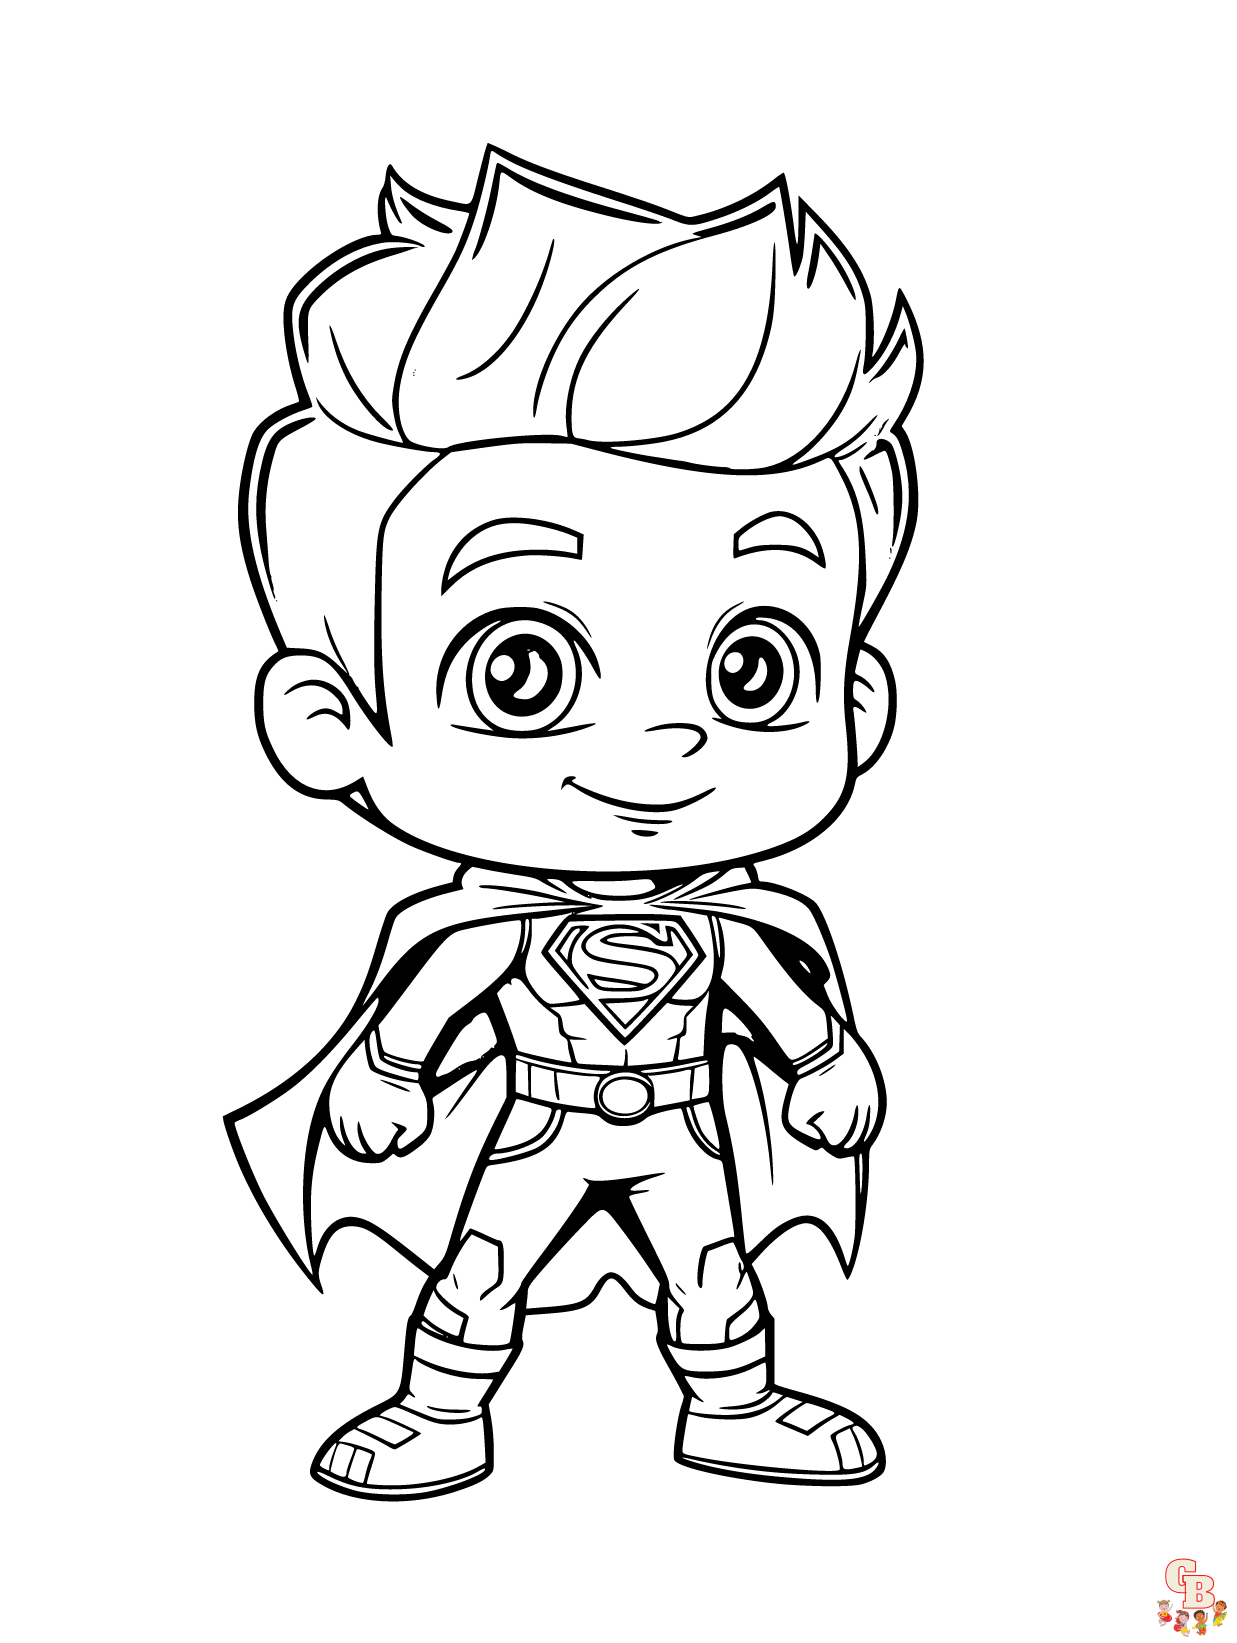 Superhero coloring pages unleash your childs creativity